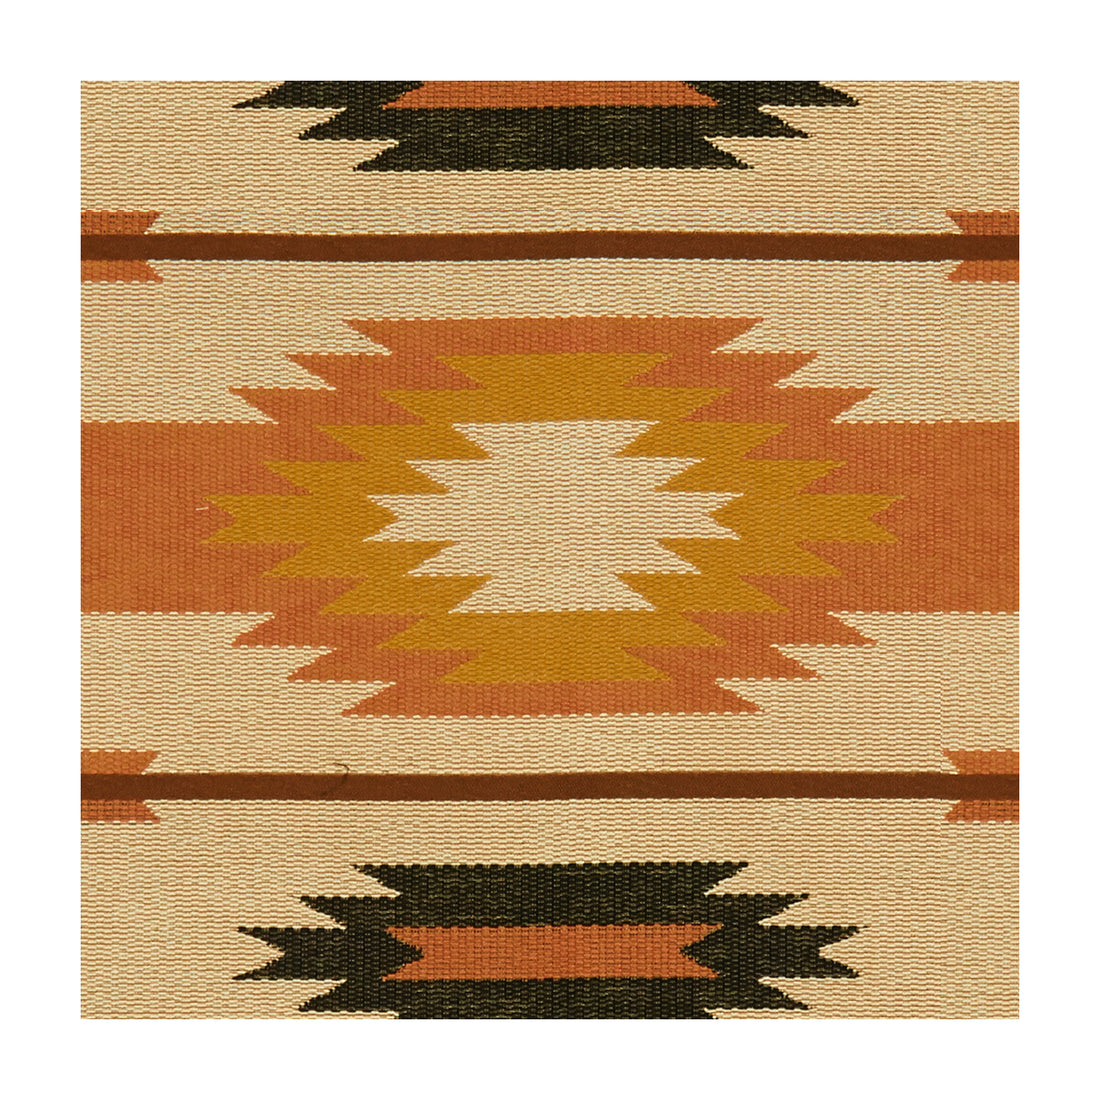 Outpost fabric in yam color - pattern 33812.812.0 - by Kravet Design in the Museum Of New Mexico collection